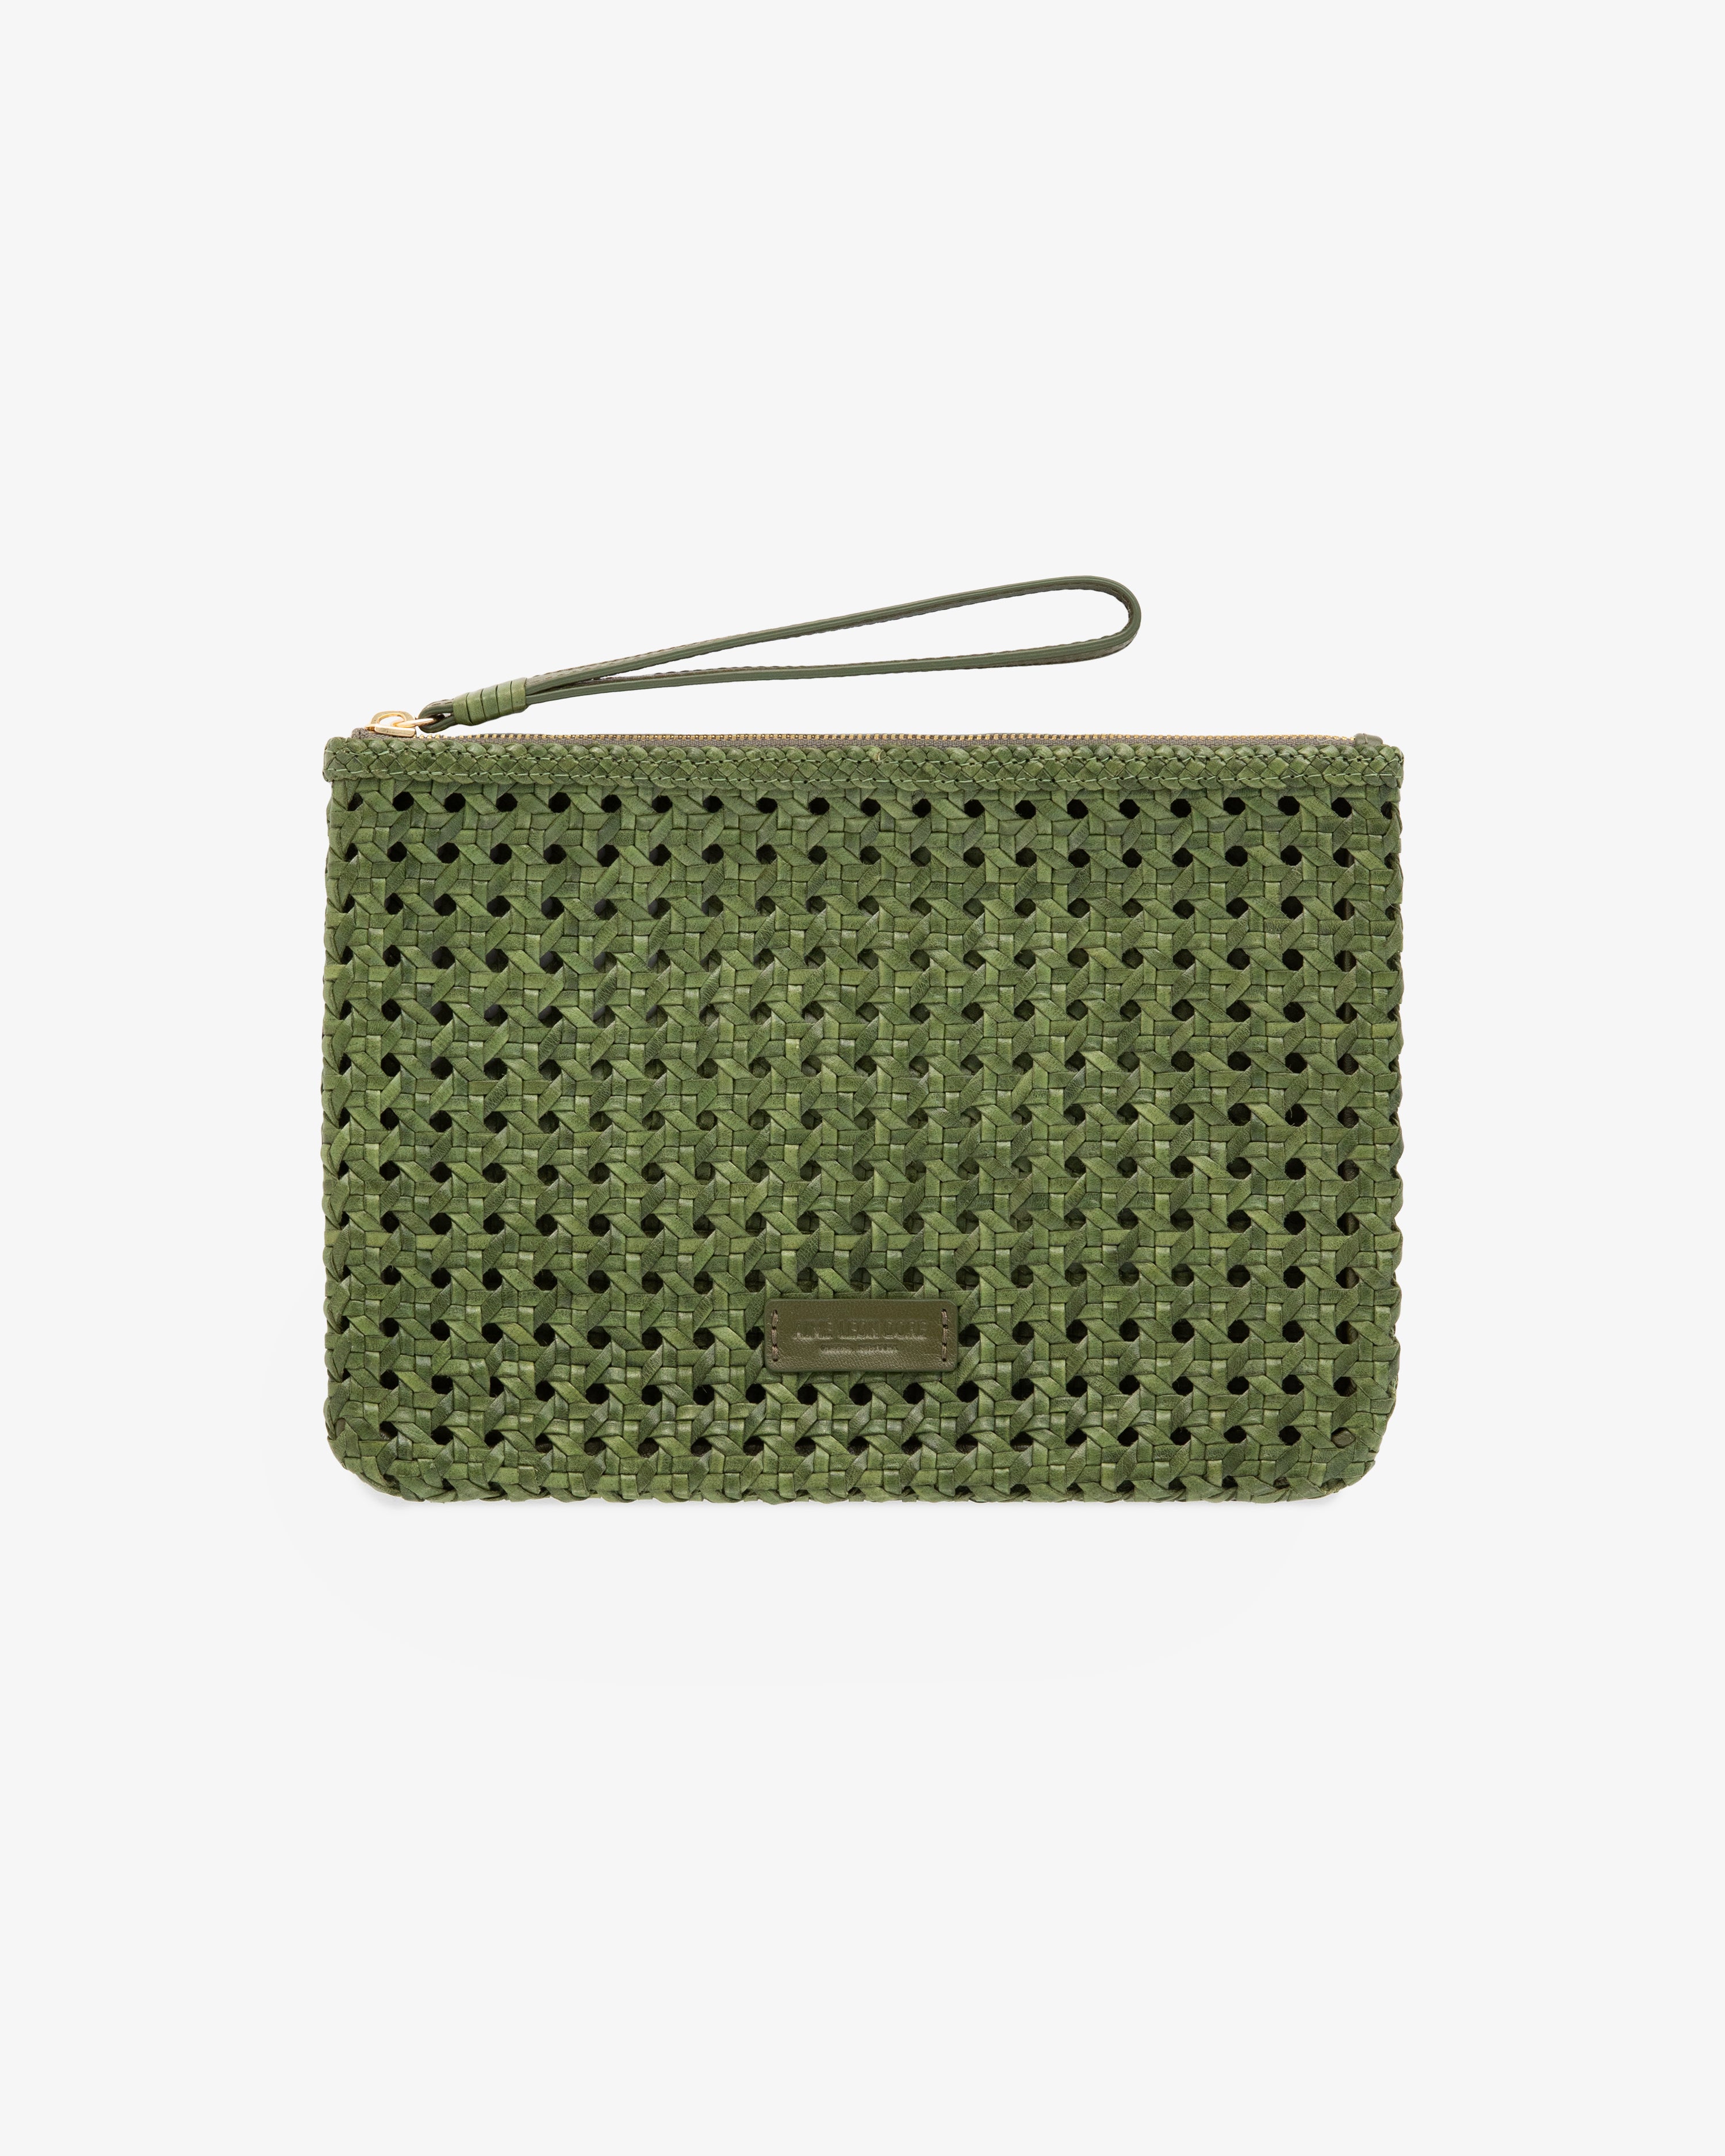 Woven Leather Pouch